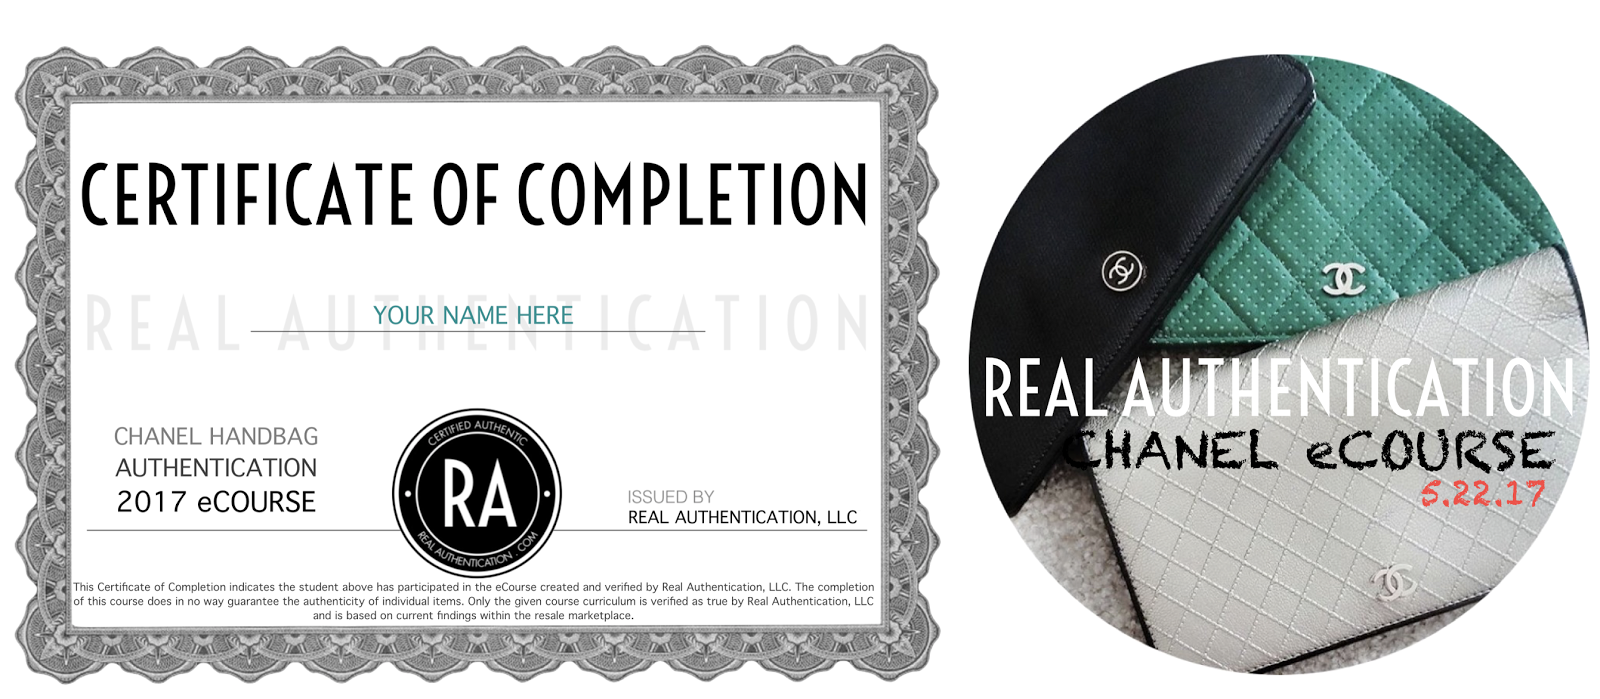 REAL AUTHENTICATION RELEASES FIRST CHANEL AUTHENTICATION eCOURSE | REAL AUTHENTICATION | Luxury ...